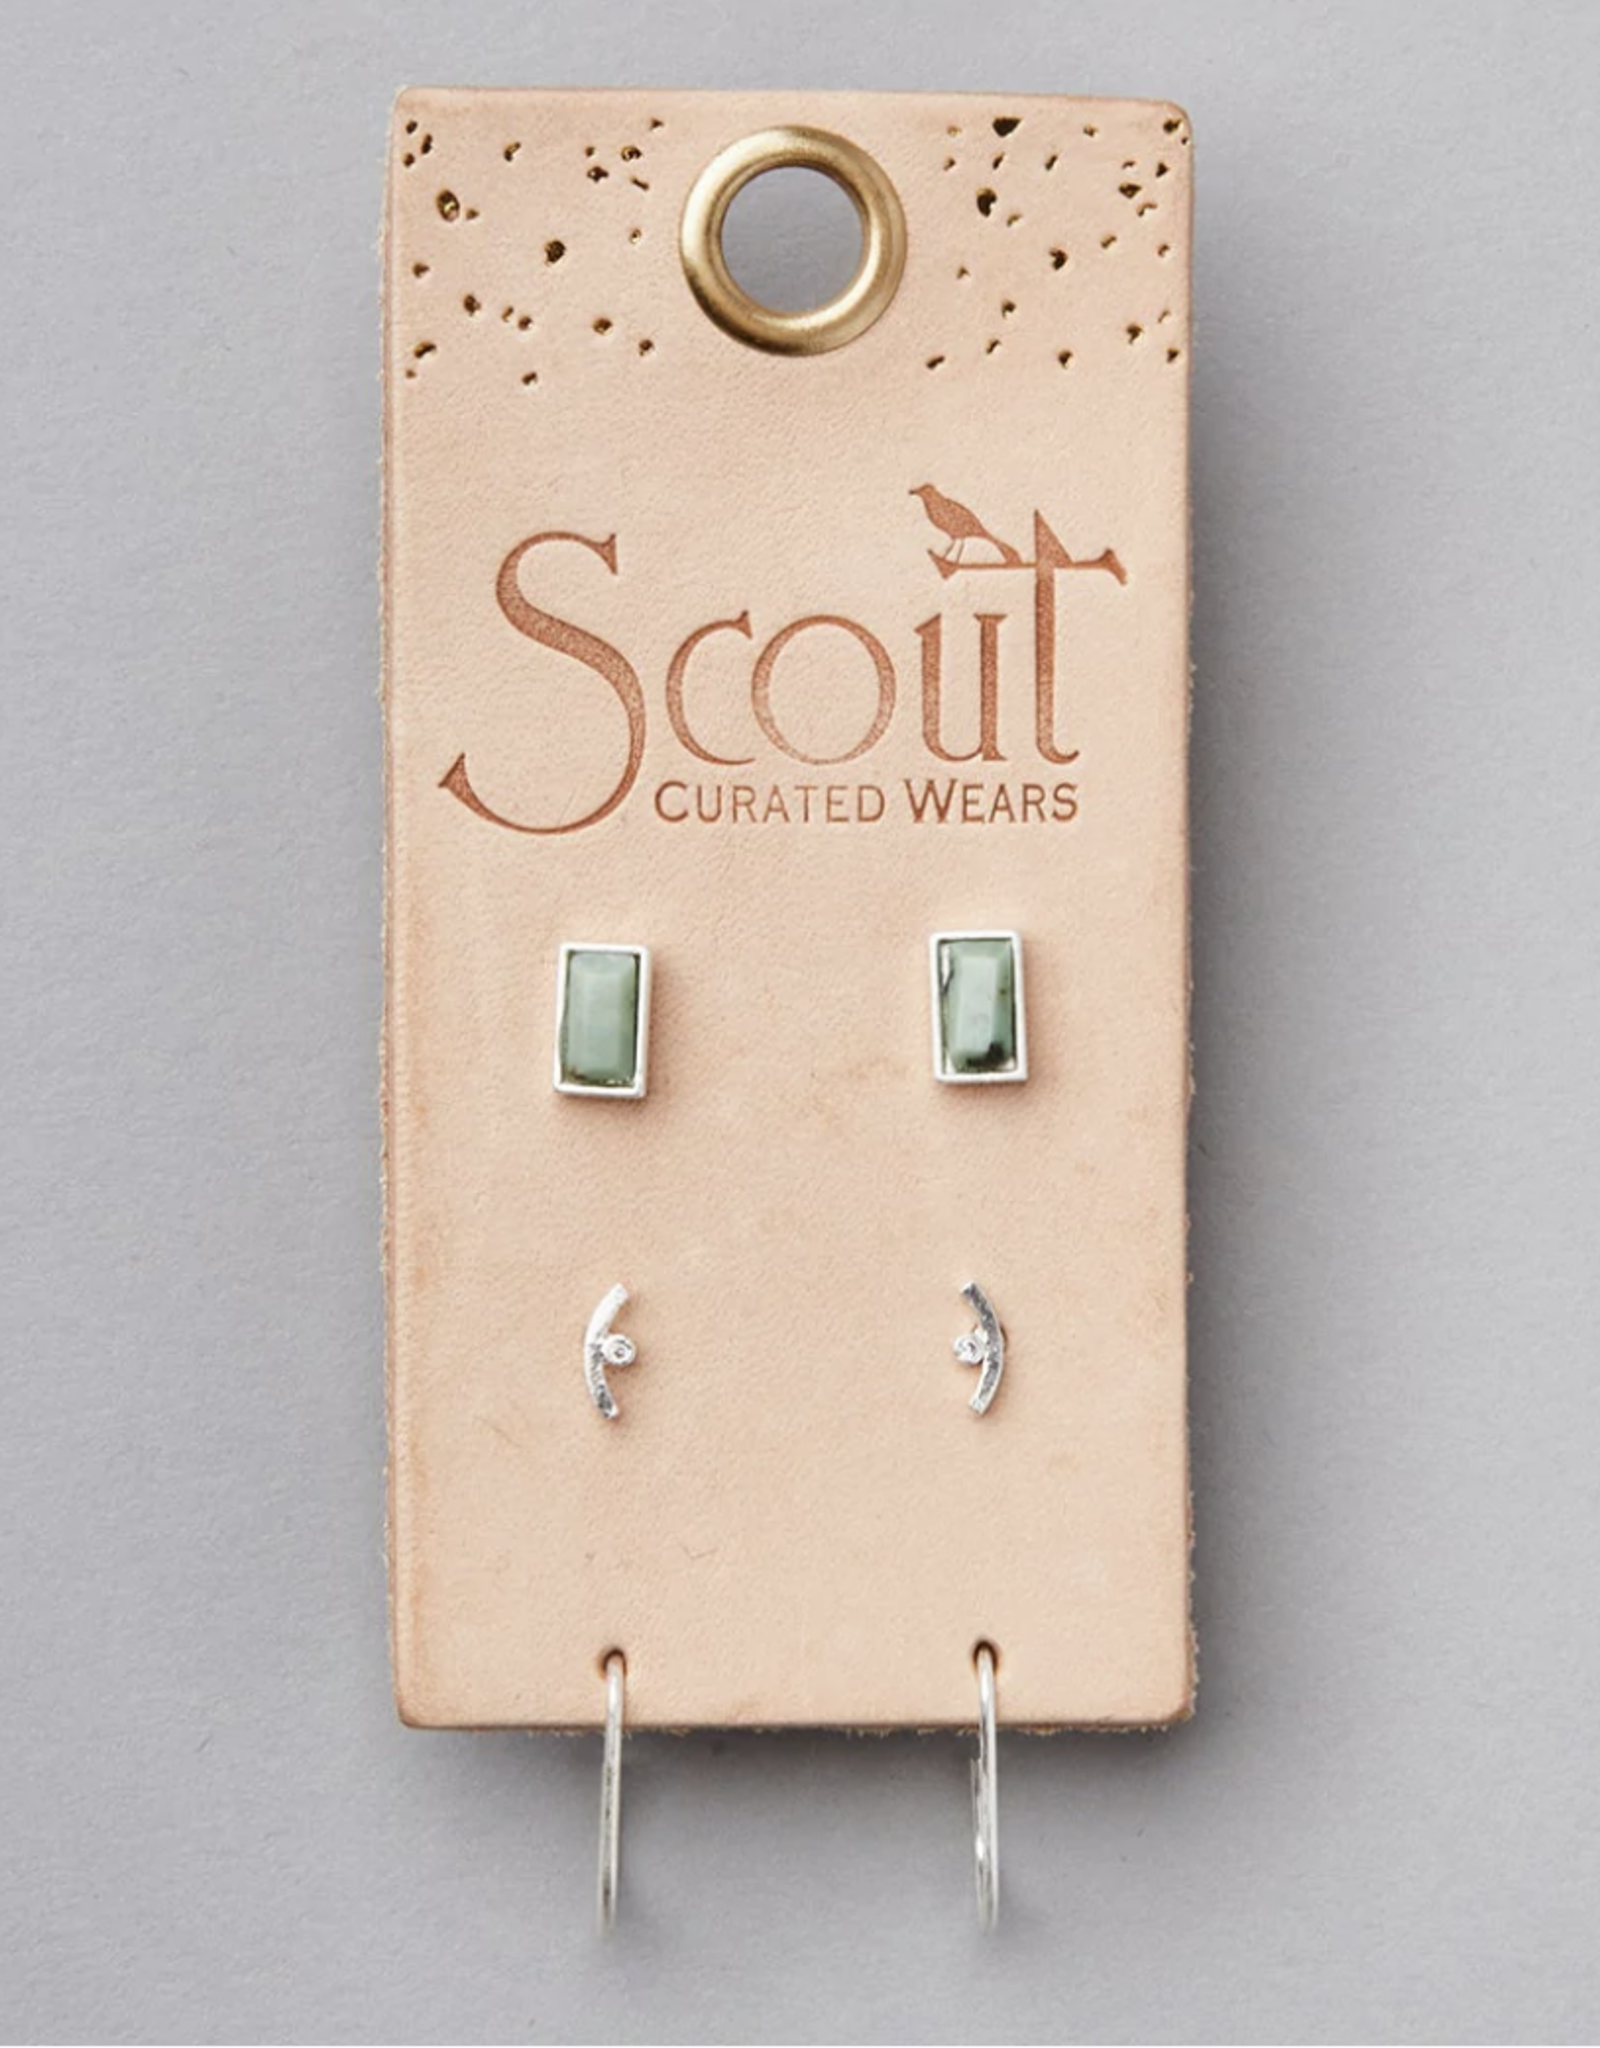 Scout Courtney Stud Earring Trio- Silver